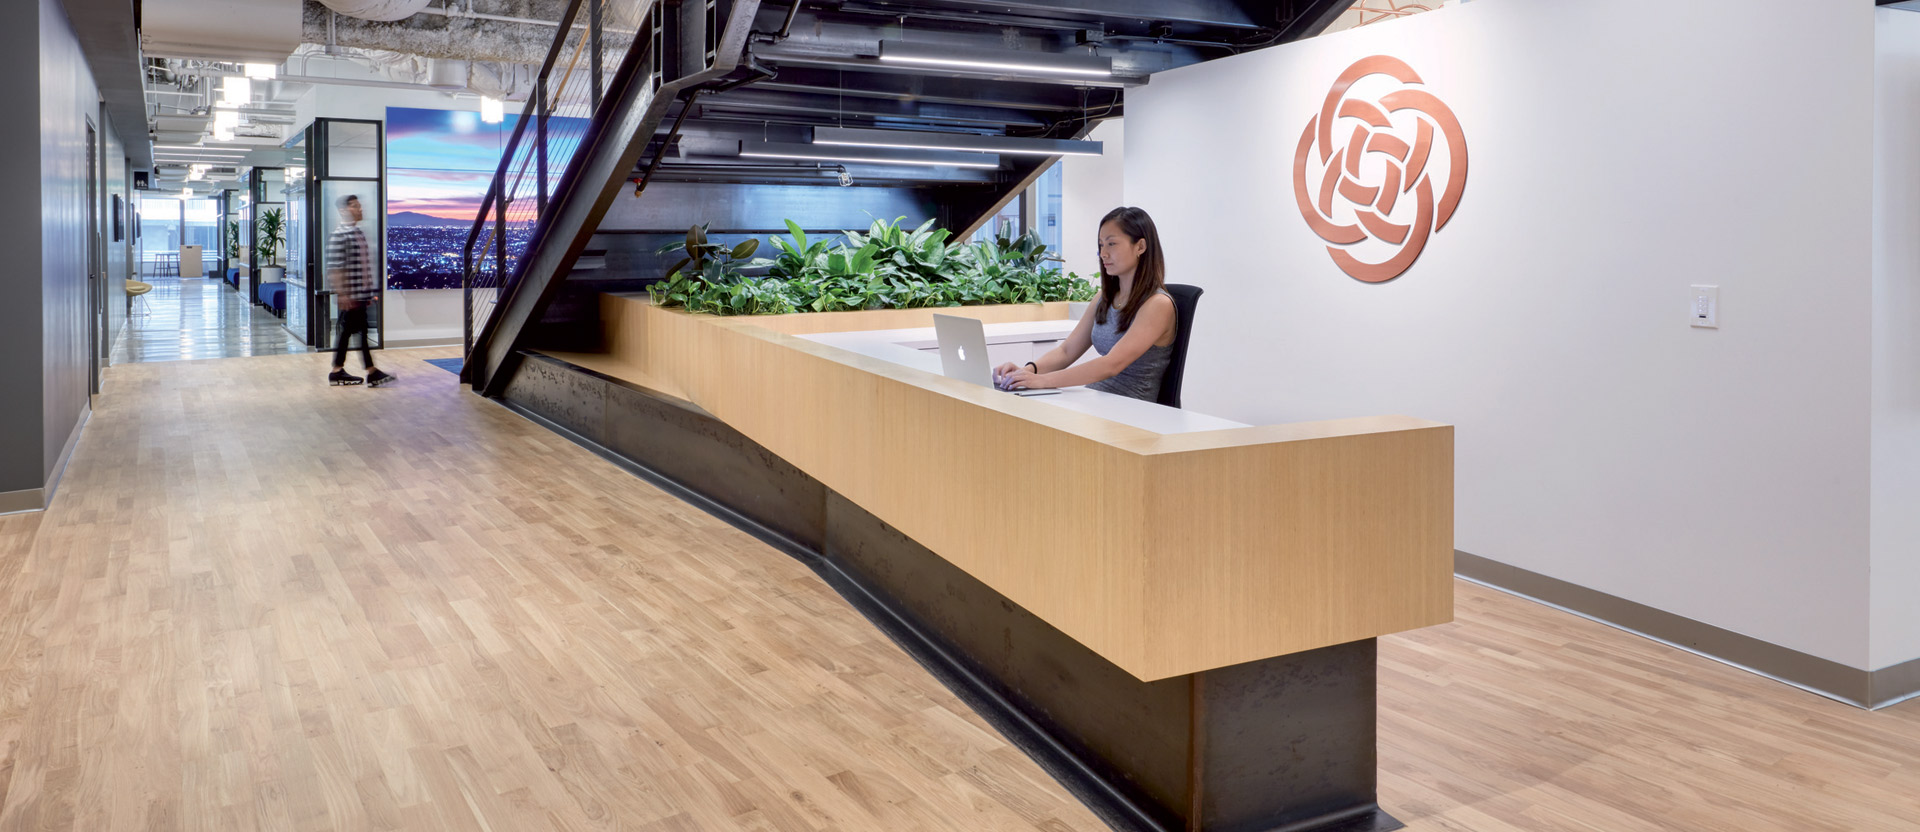 Modern office lobby featuring an angular wooden reception desk with a person at work, live greenery, exposed ceiling ductwork, and sleek metal staircase, creating a balance of industrial and organic design elements.